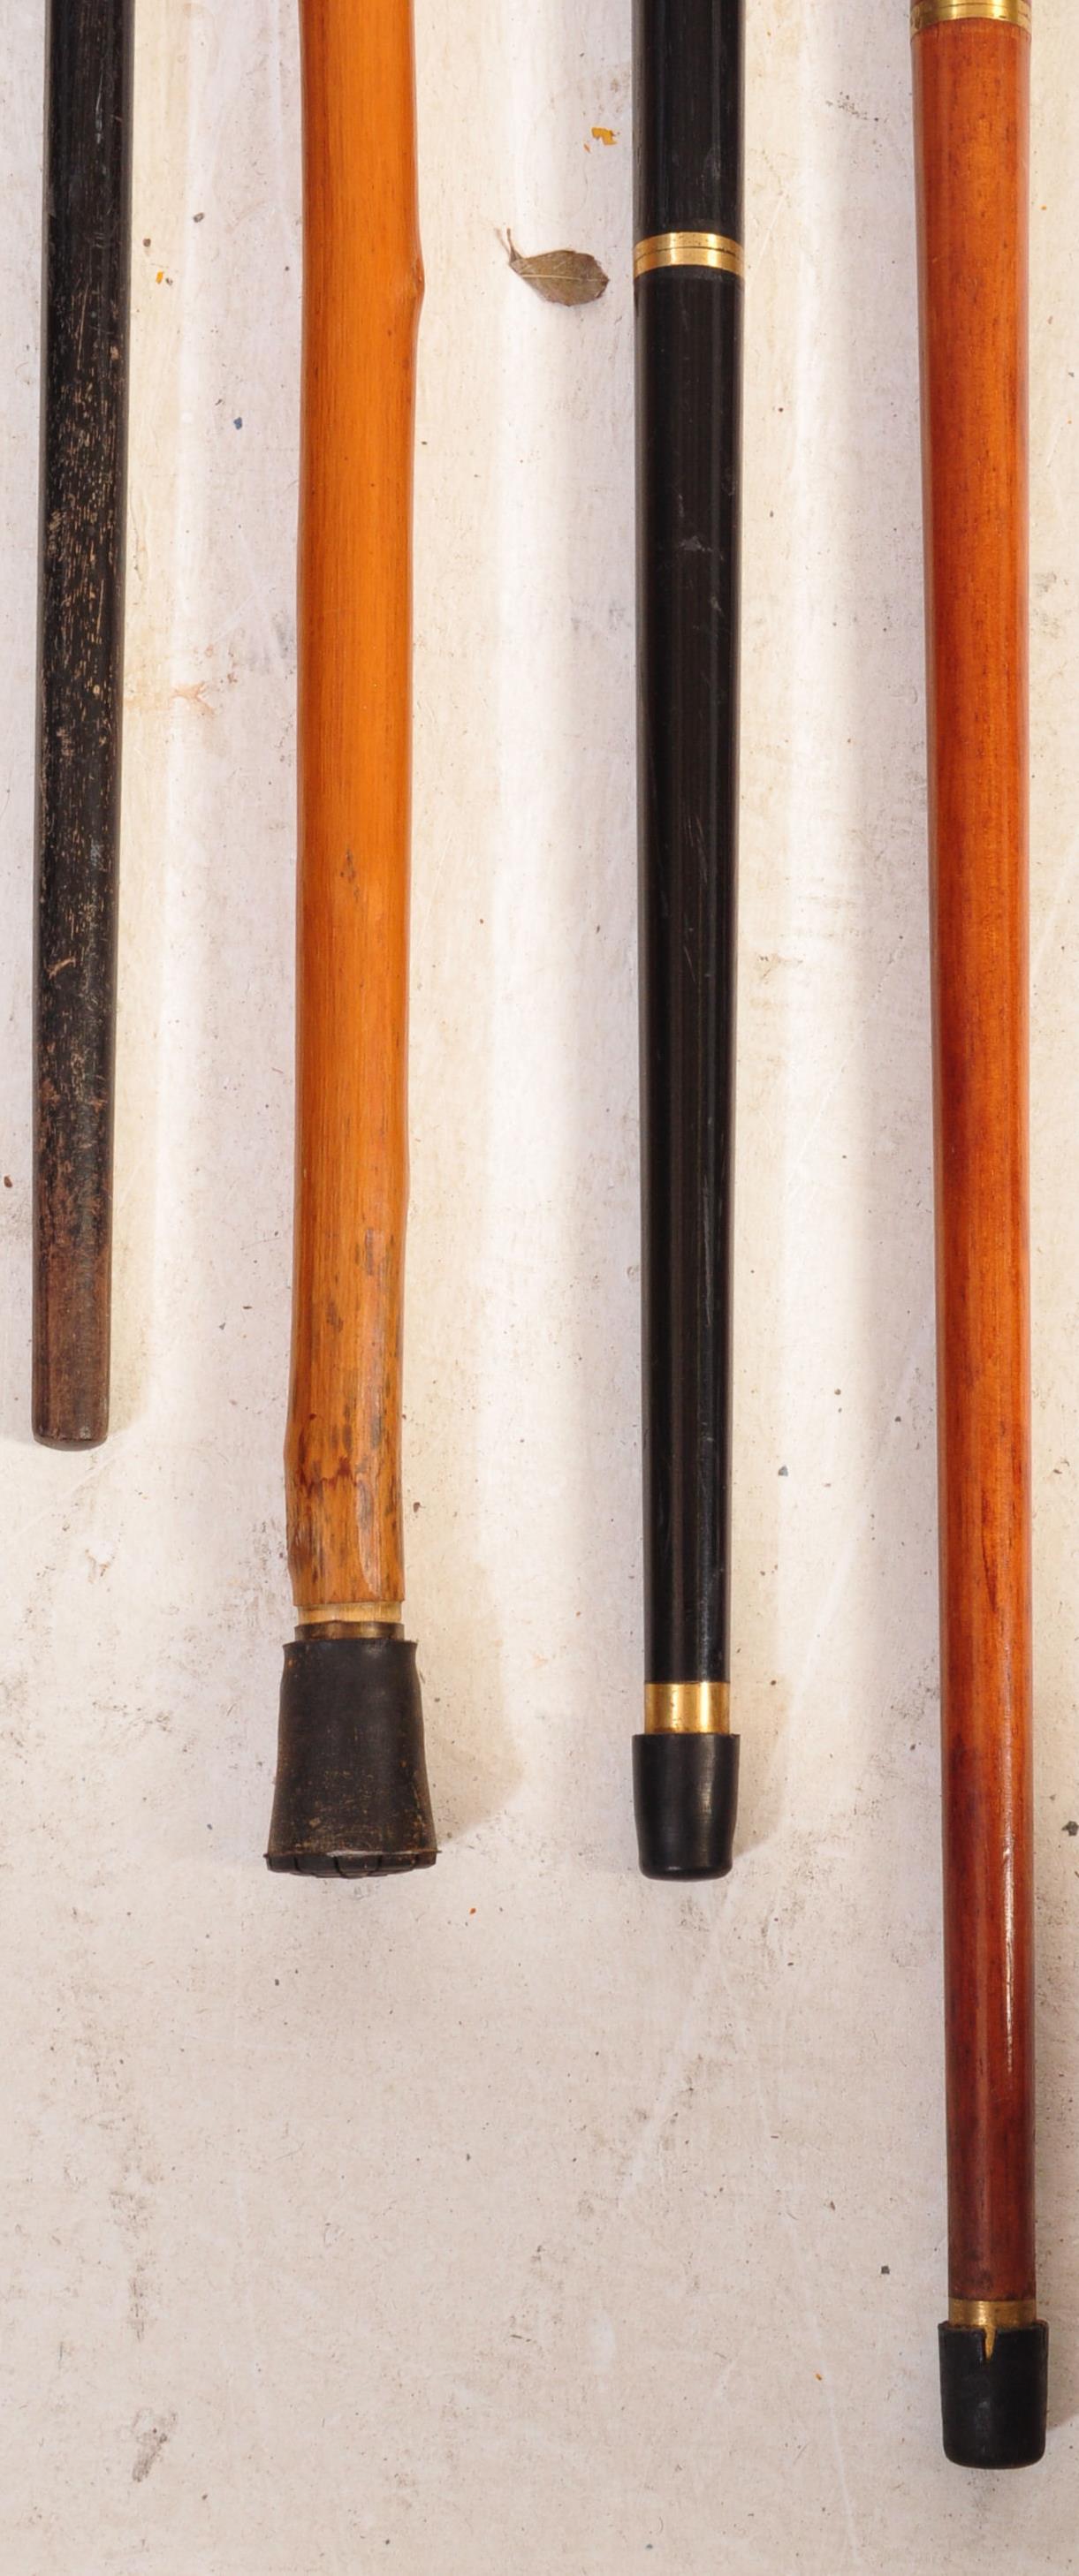 COLLECTION OF VINTAGE 20TH CENTURY WALKING STICKS - Image 7 of 8